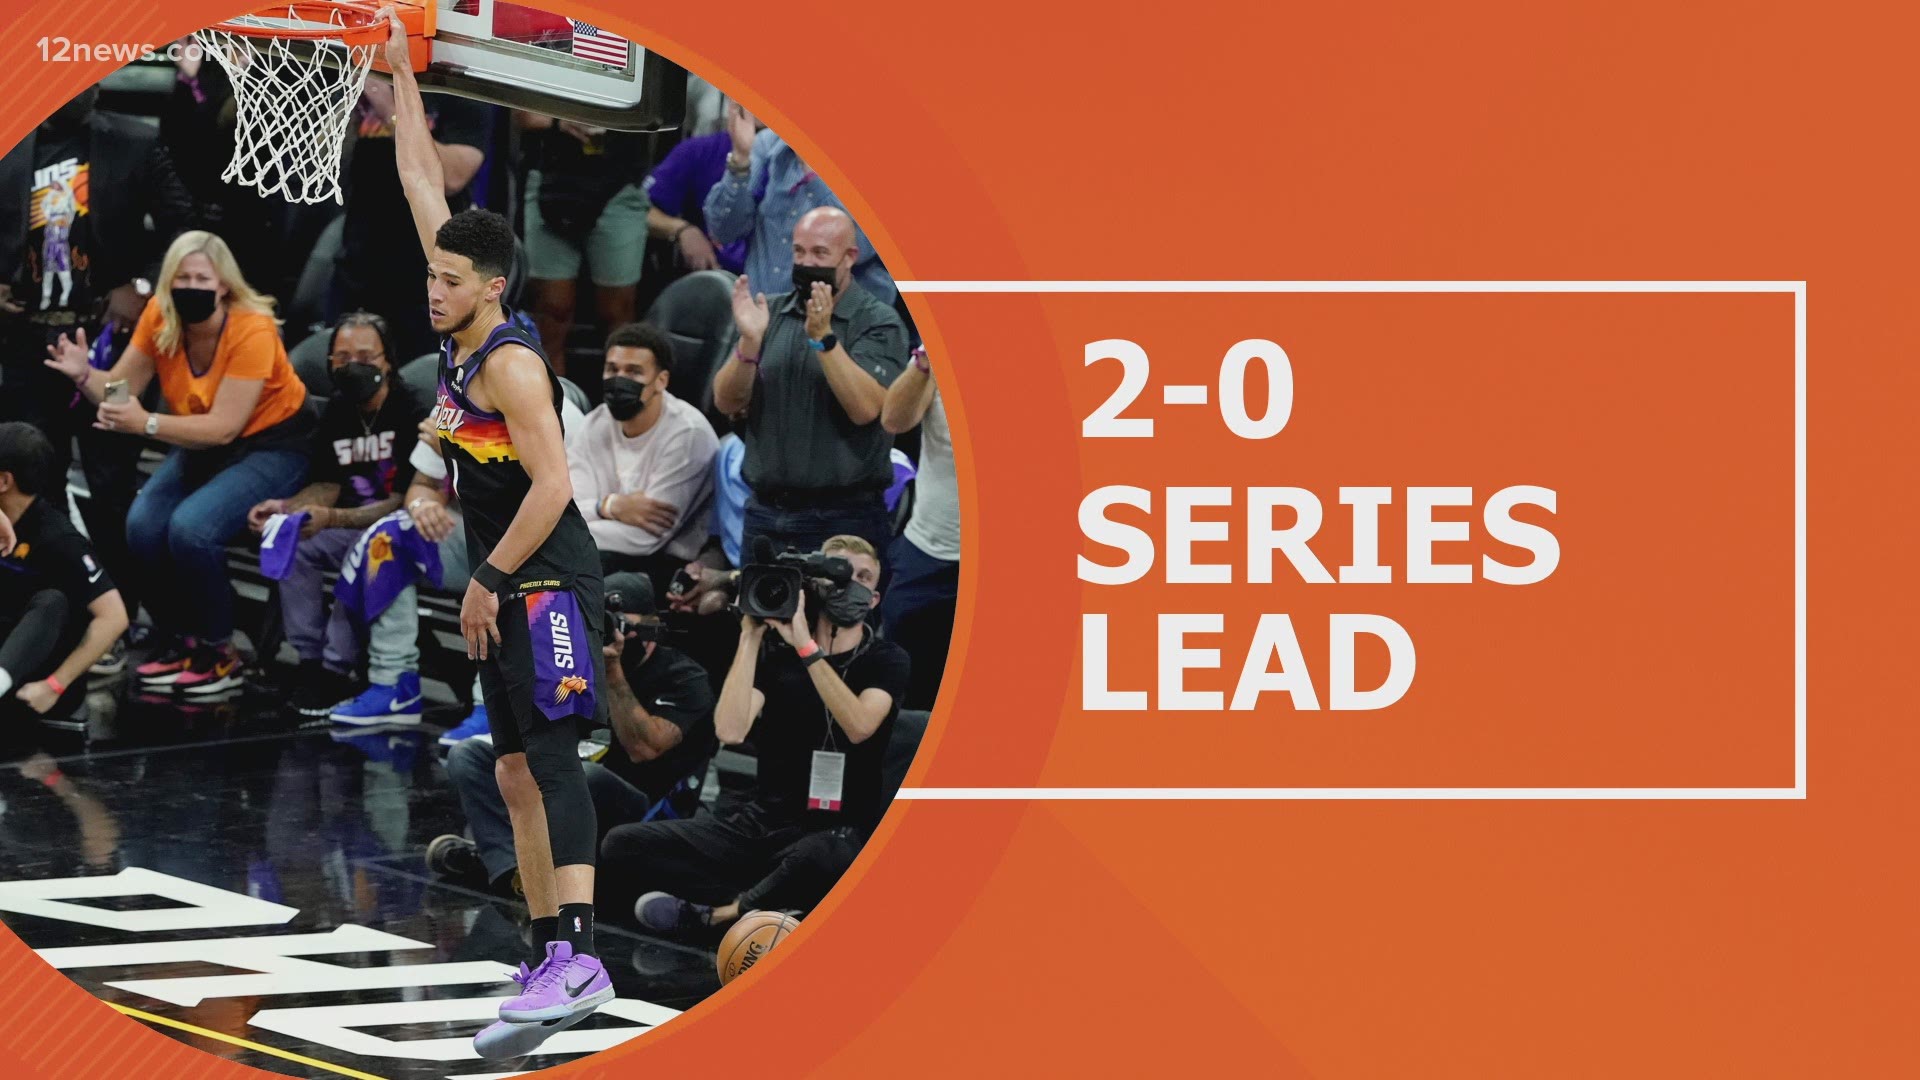 Phoenix Suns take a 2-0 series lead against the Denver Nuggets in the second round of the 2021 NBA Playoffs. Ryan Cody has a recap.